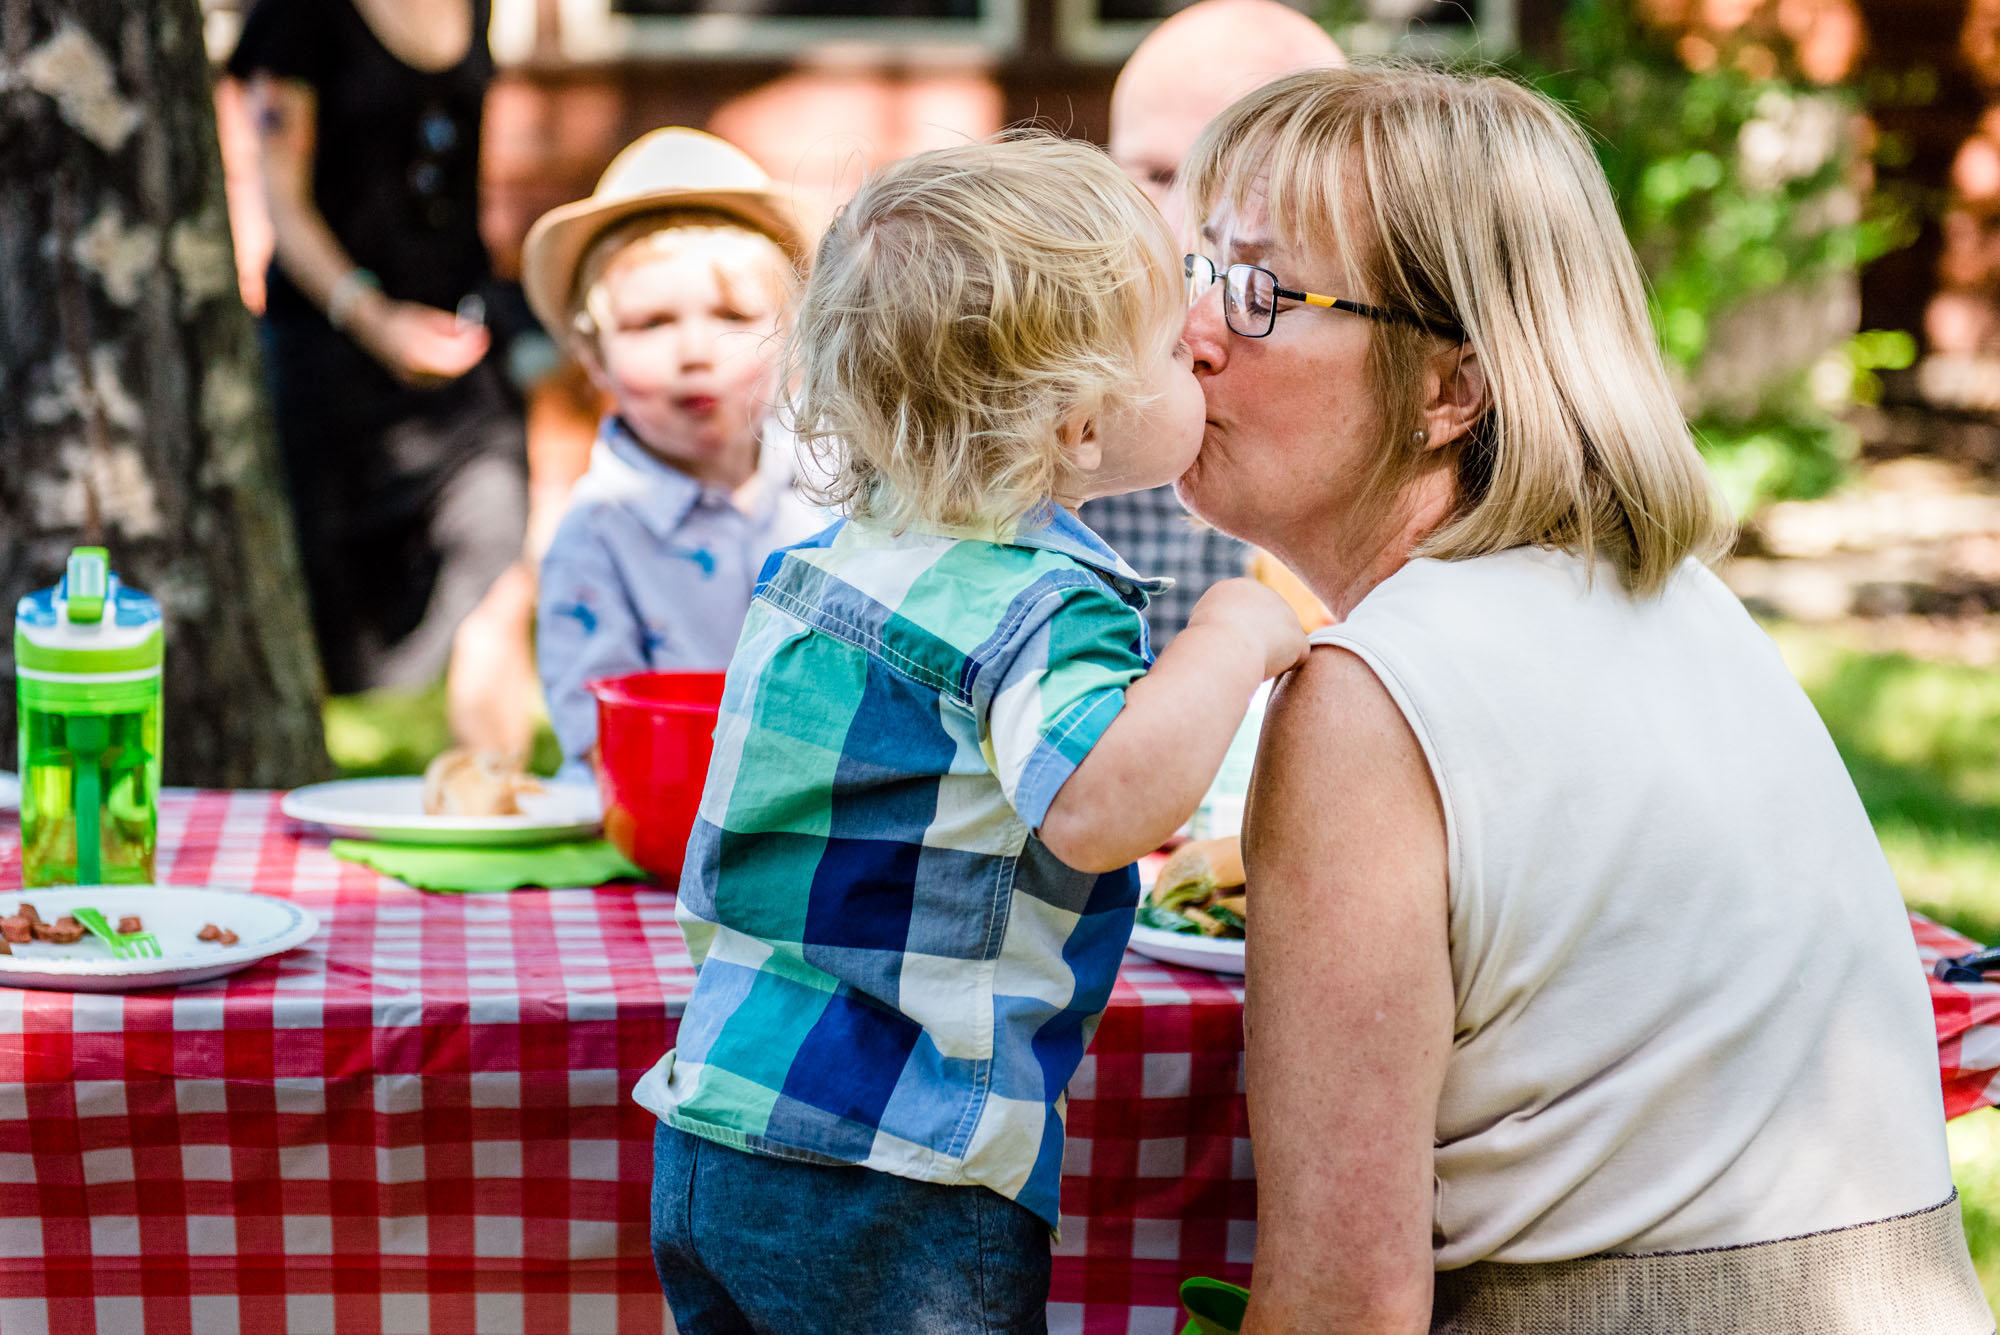 A little boy kisses his Grandma during a family reunion and photo shoot